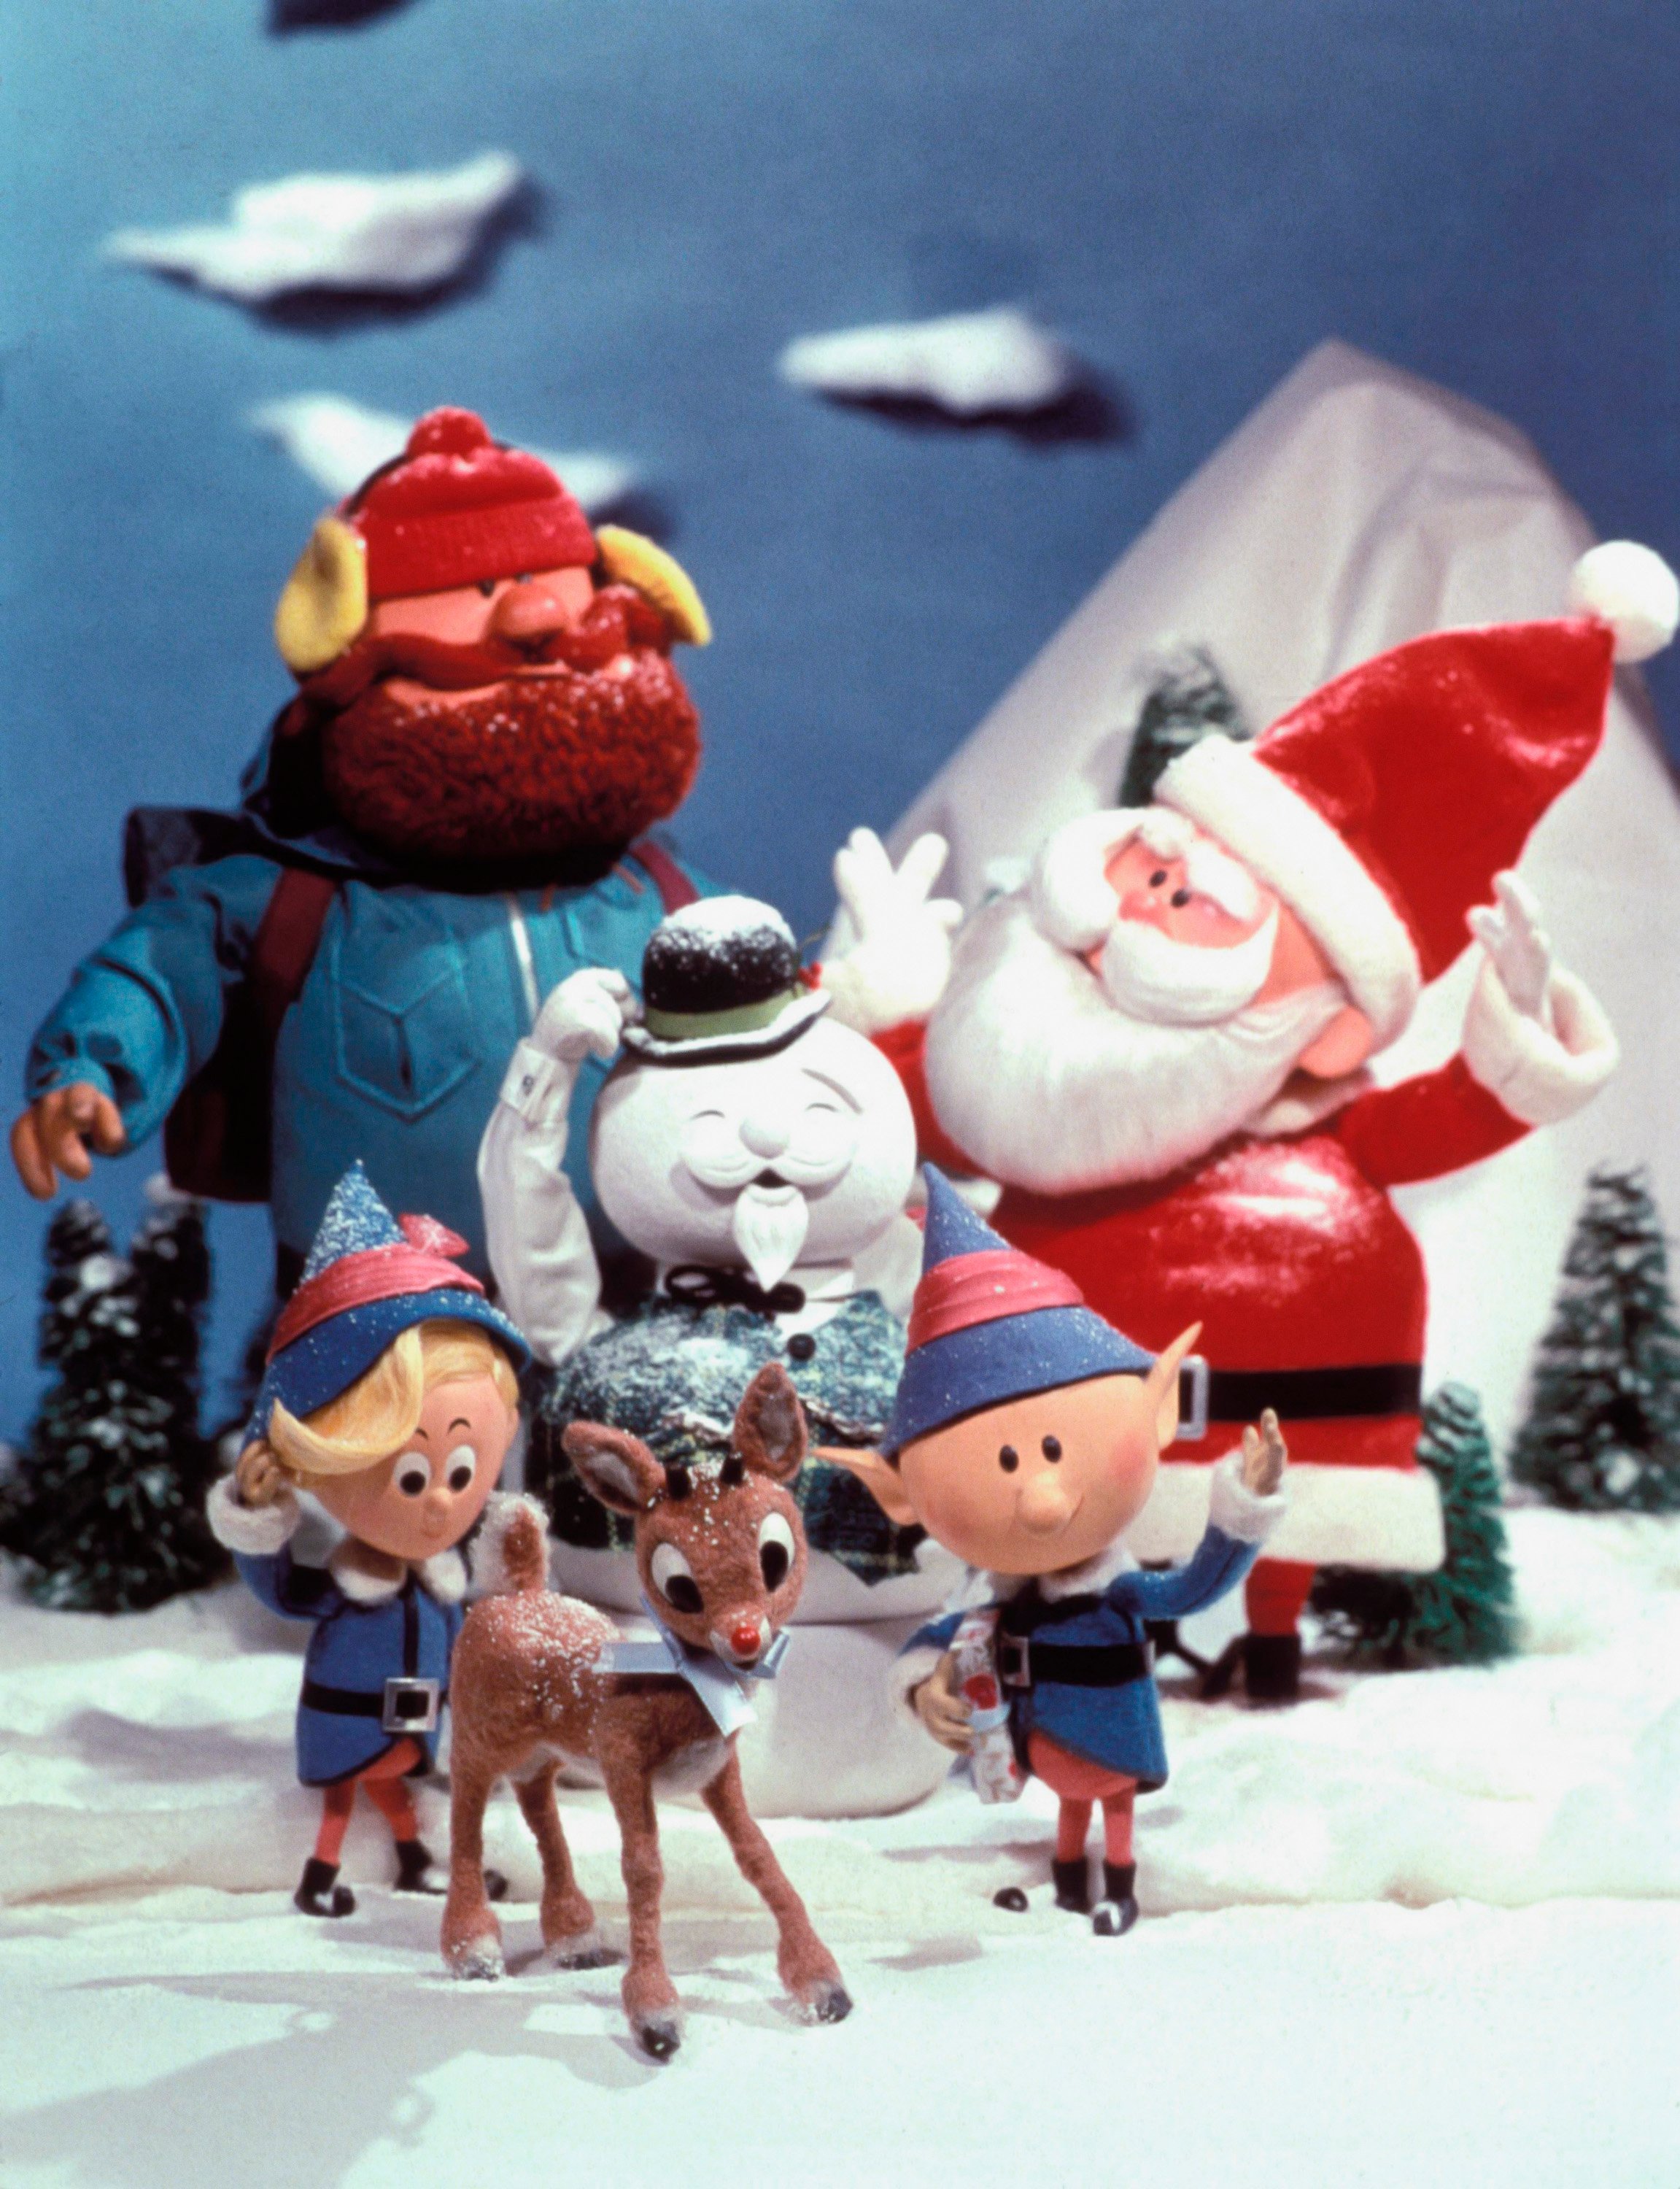 'Rudolph the Red-Nosed Reindeer' characters Rudolph, Hermey, Yukon Cornelius, Snowman, and Santa.